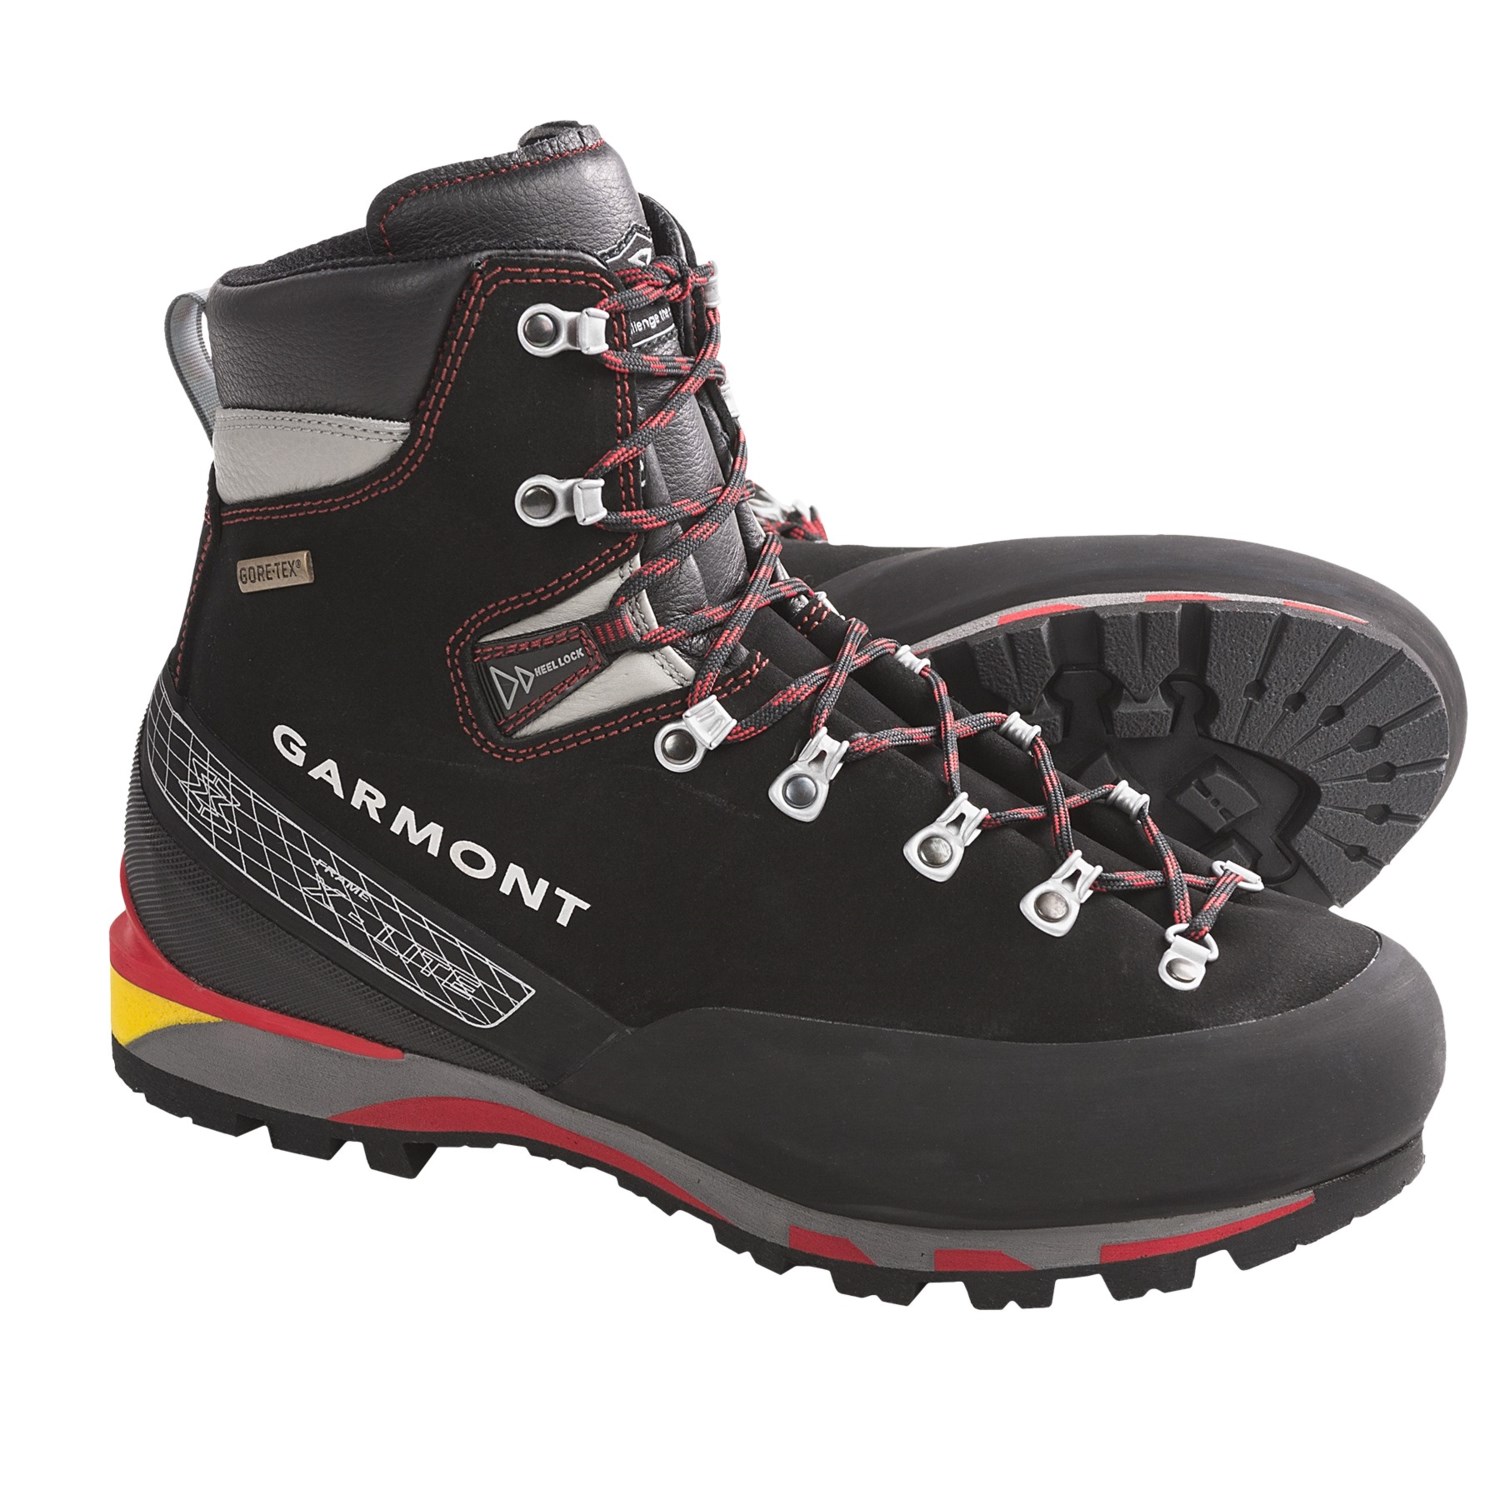 Garmont Pinnacle Gore-Tex® Mountaineering Boots (For Men) 6211H - Save 37%